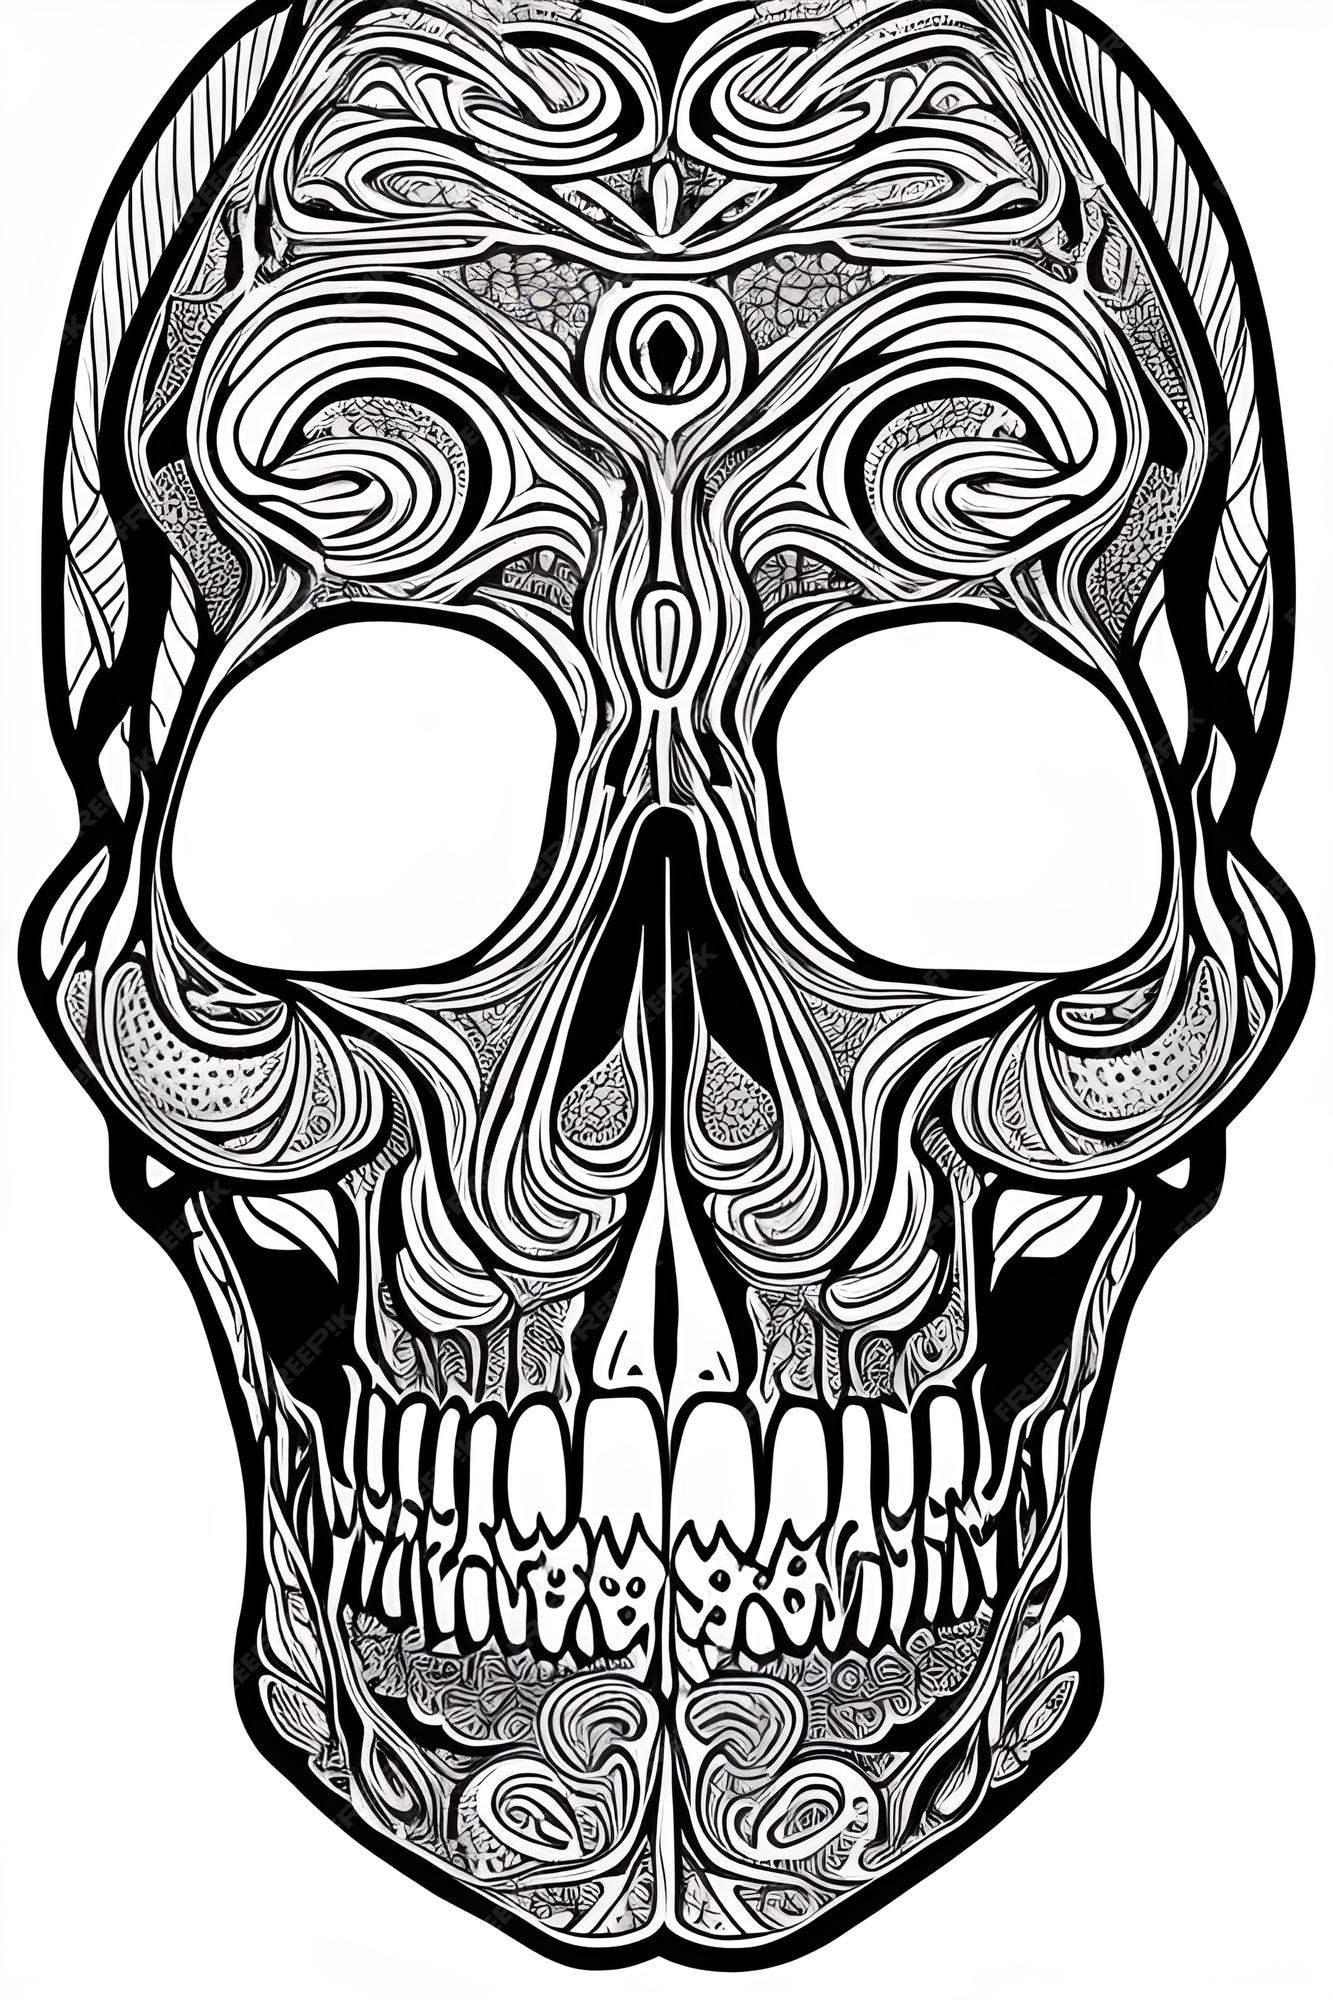 Premium photo coloring page of a human skull for kdp coloring books for adults